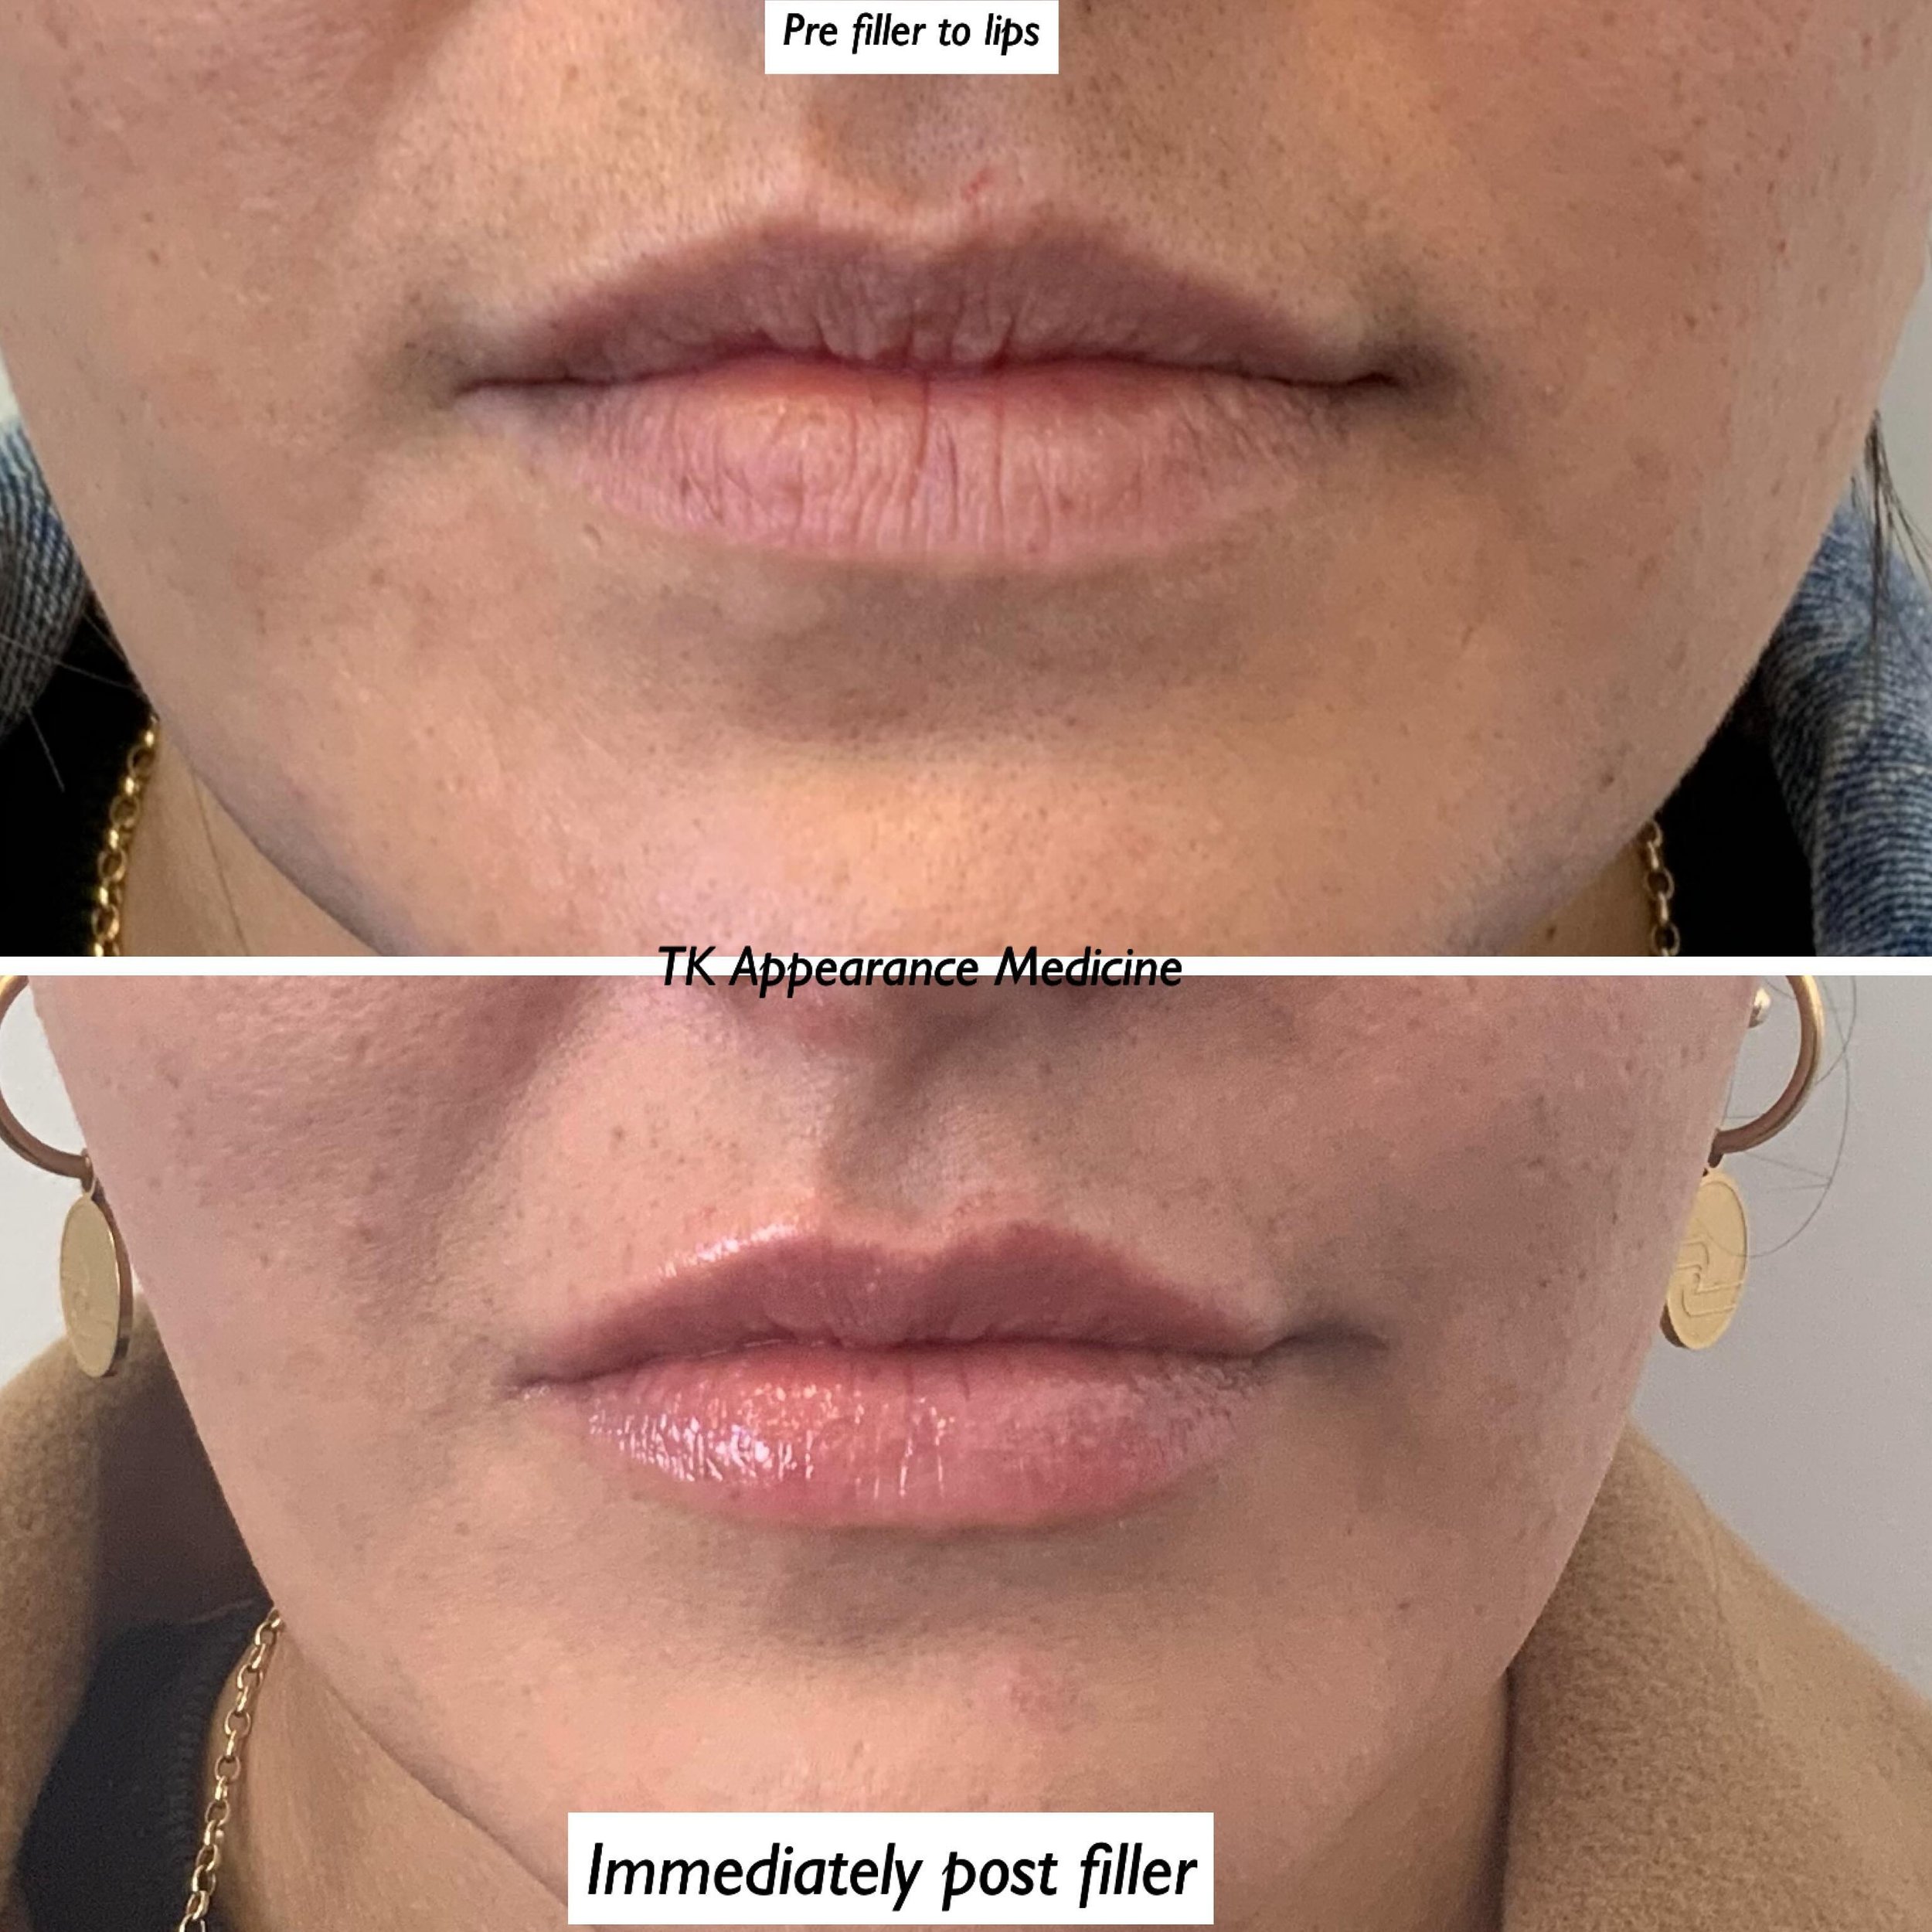 A total of 0.5mls  of premium lip  filler injected into these lips.  A lovely natural augmentation 

Toni xx